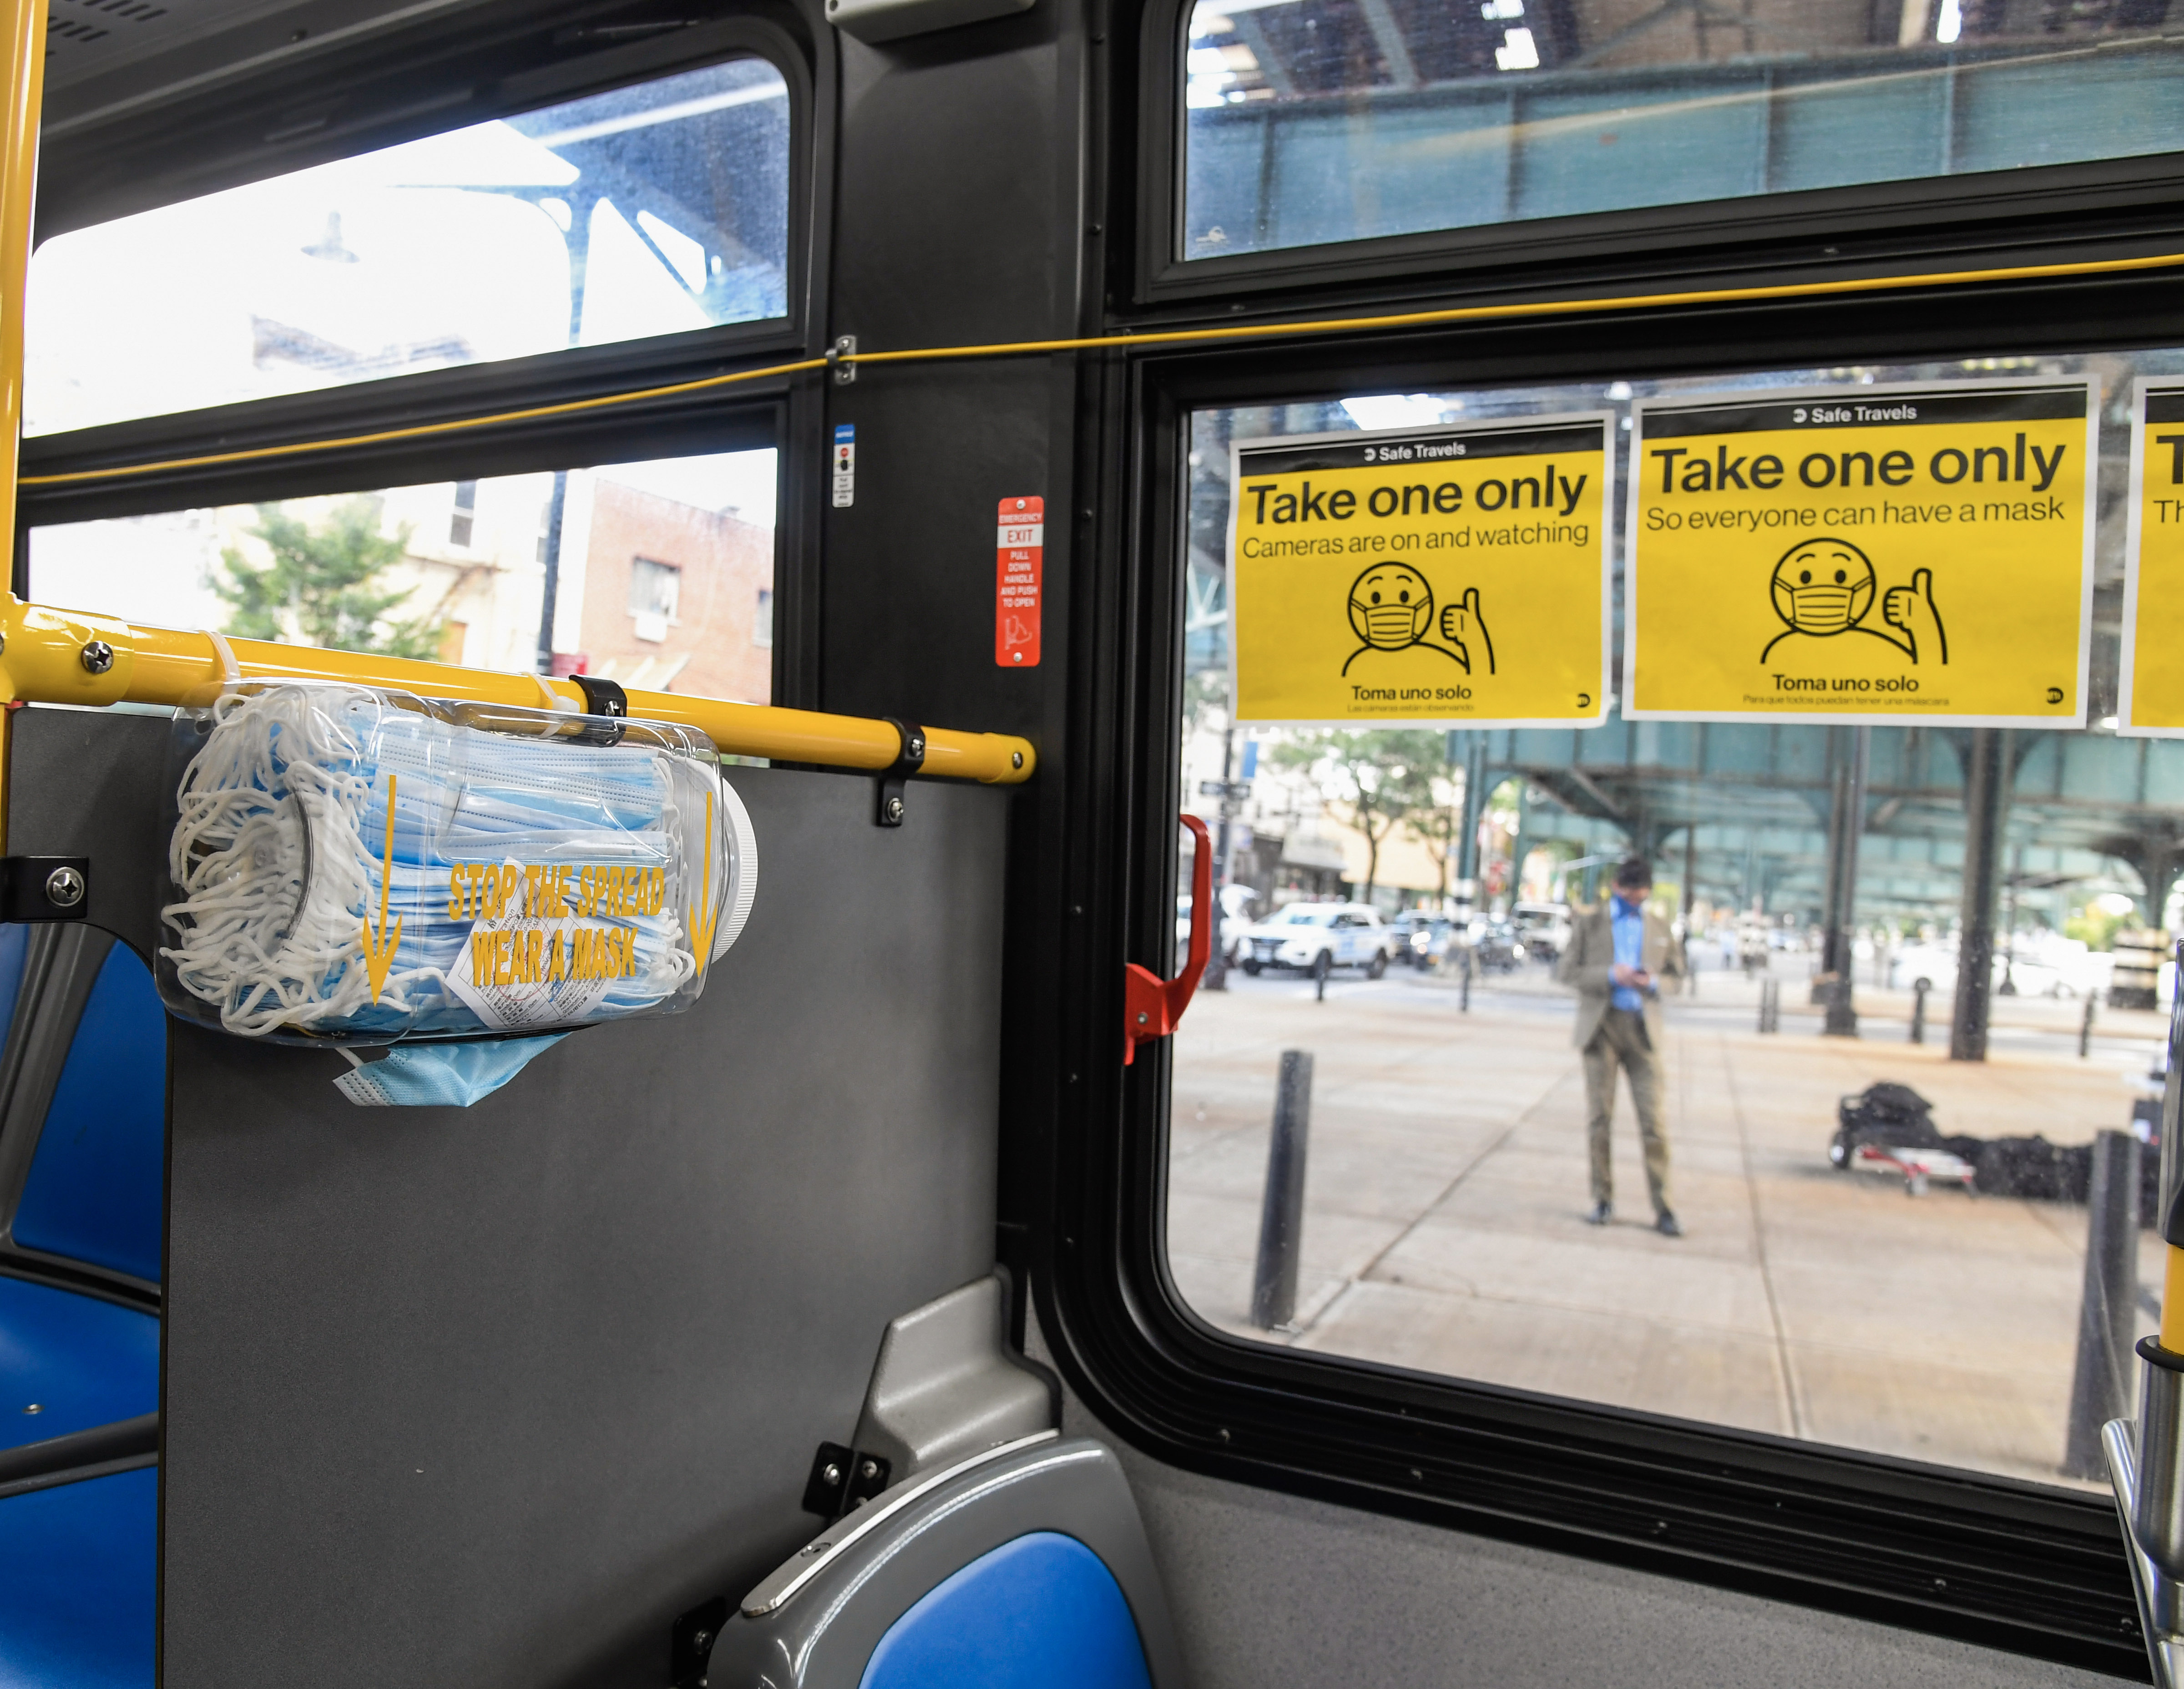 MTA Announces Installation of Mask Dispensers Inside Buses for Customers to Easily Access Masks When Boarding